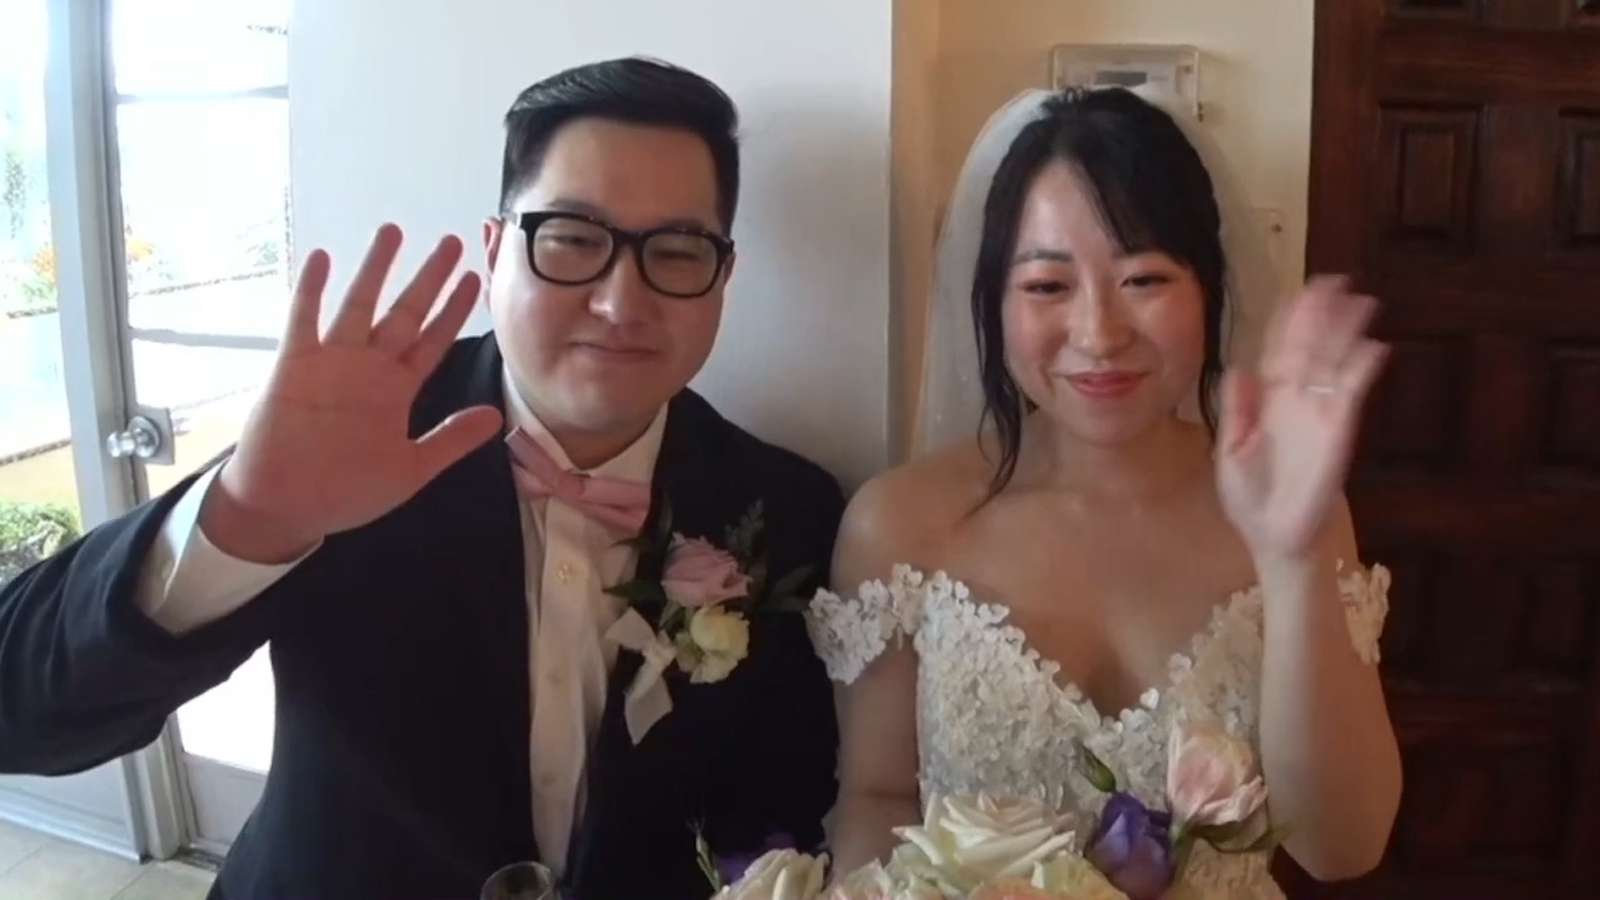 Natsumiii and Abe getting married on Twitch